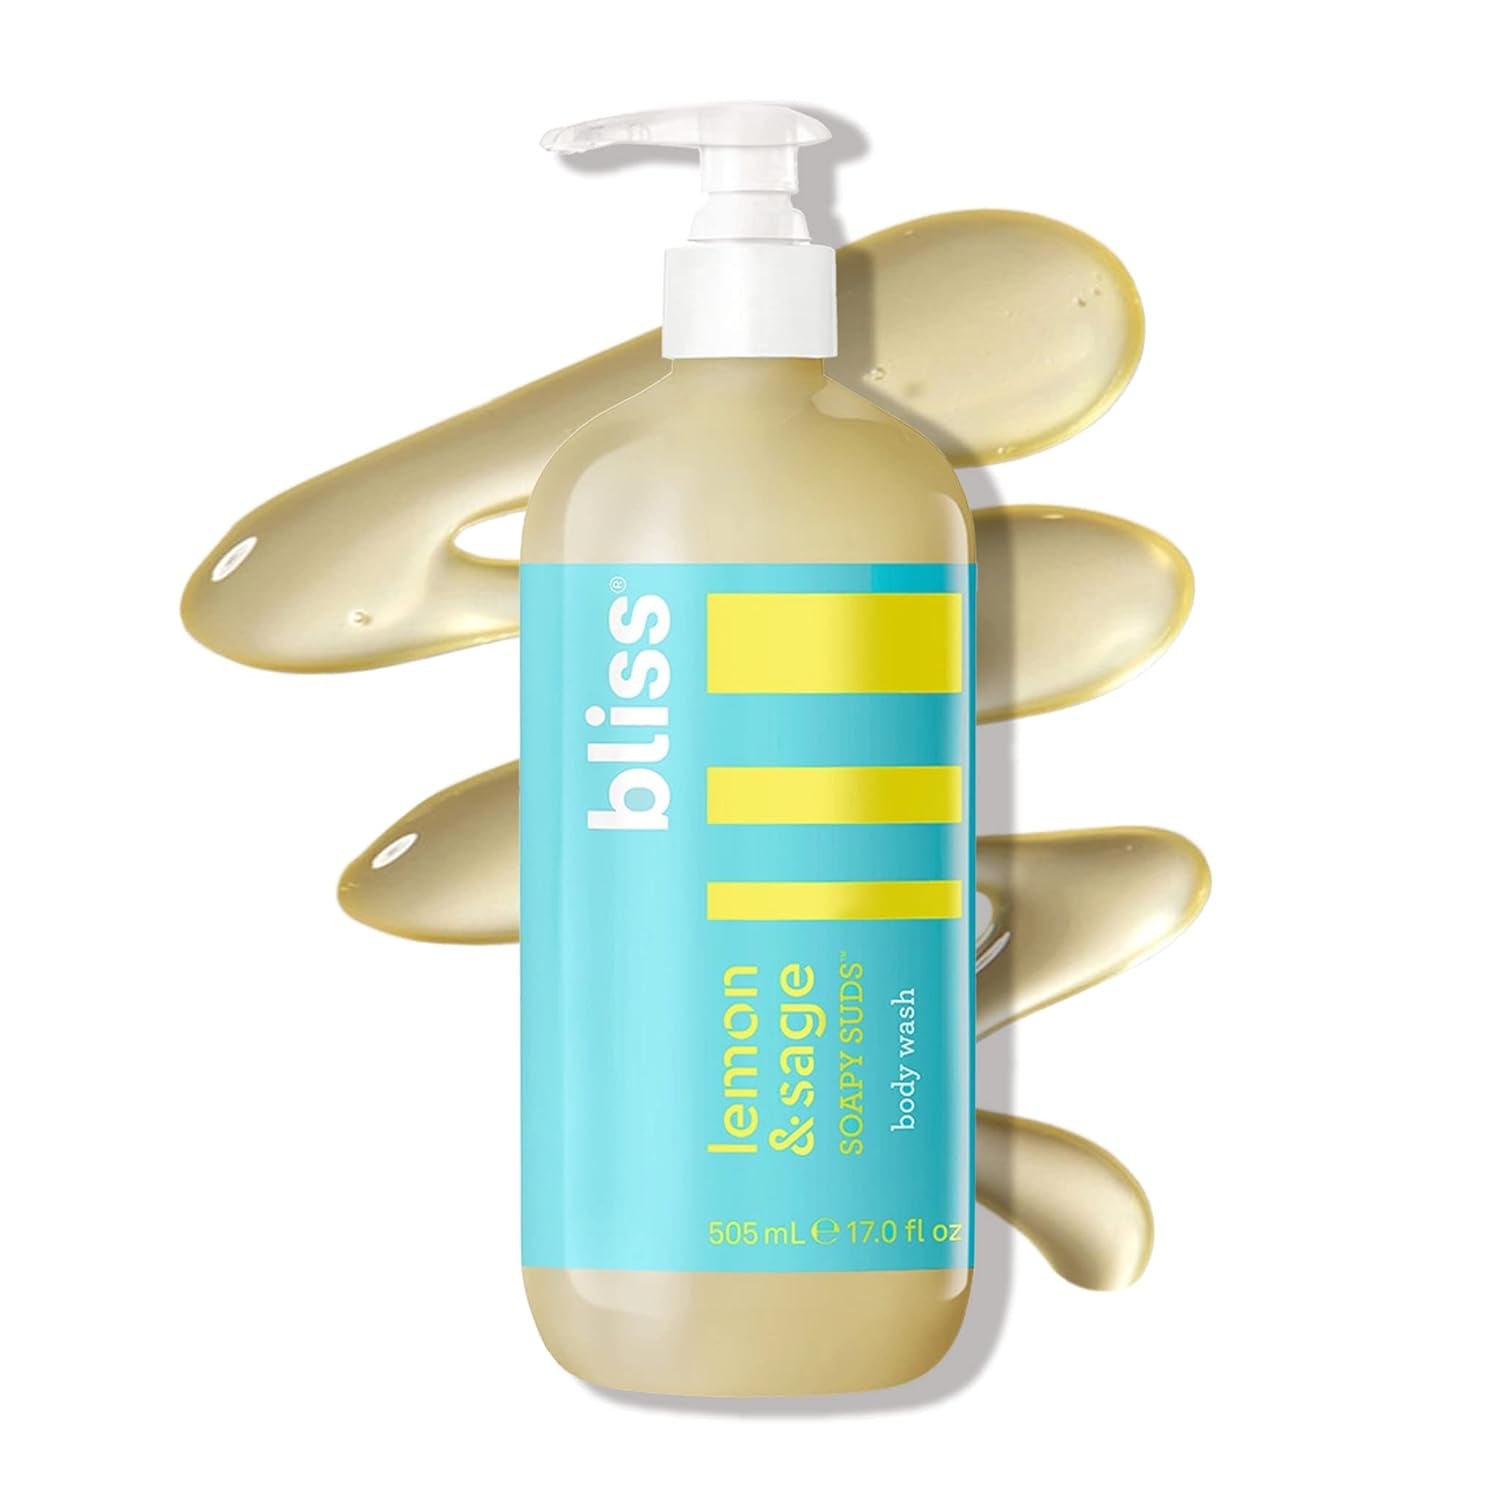 Bliss Soapy Suds Body Wash - Lemon and Sage - 17 Fl Oz - Gentle and Hydrating for Supremely Soft Skin - Paraben Free - Vegan & Cruelty Free